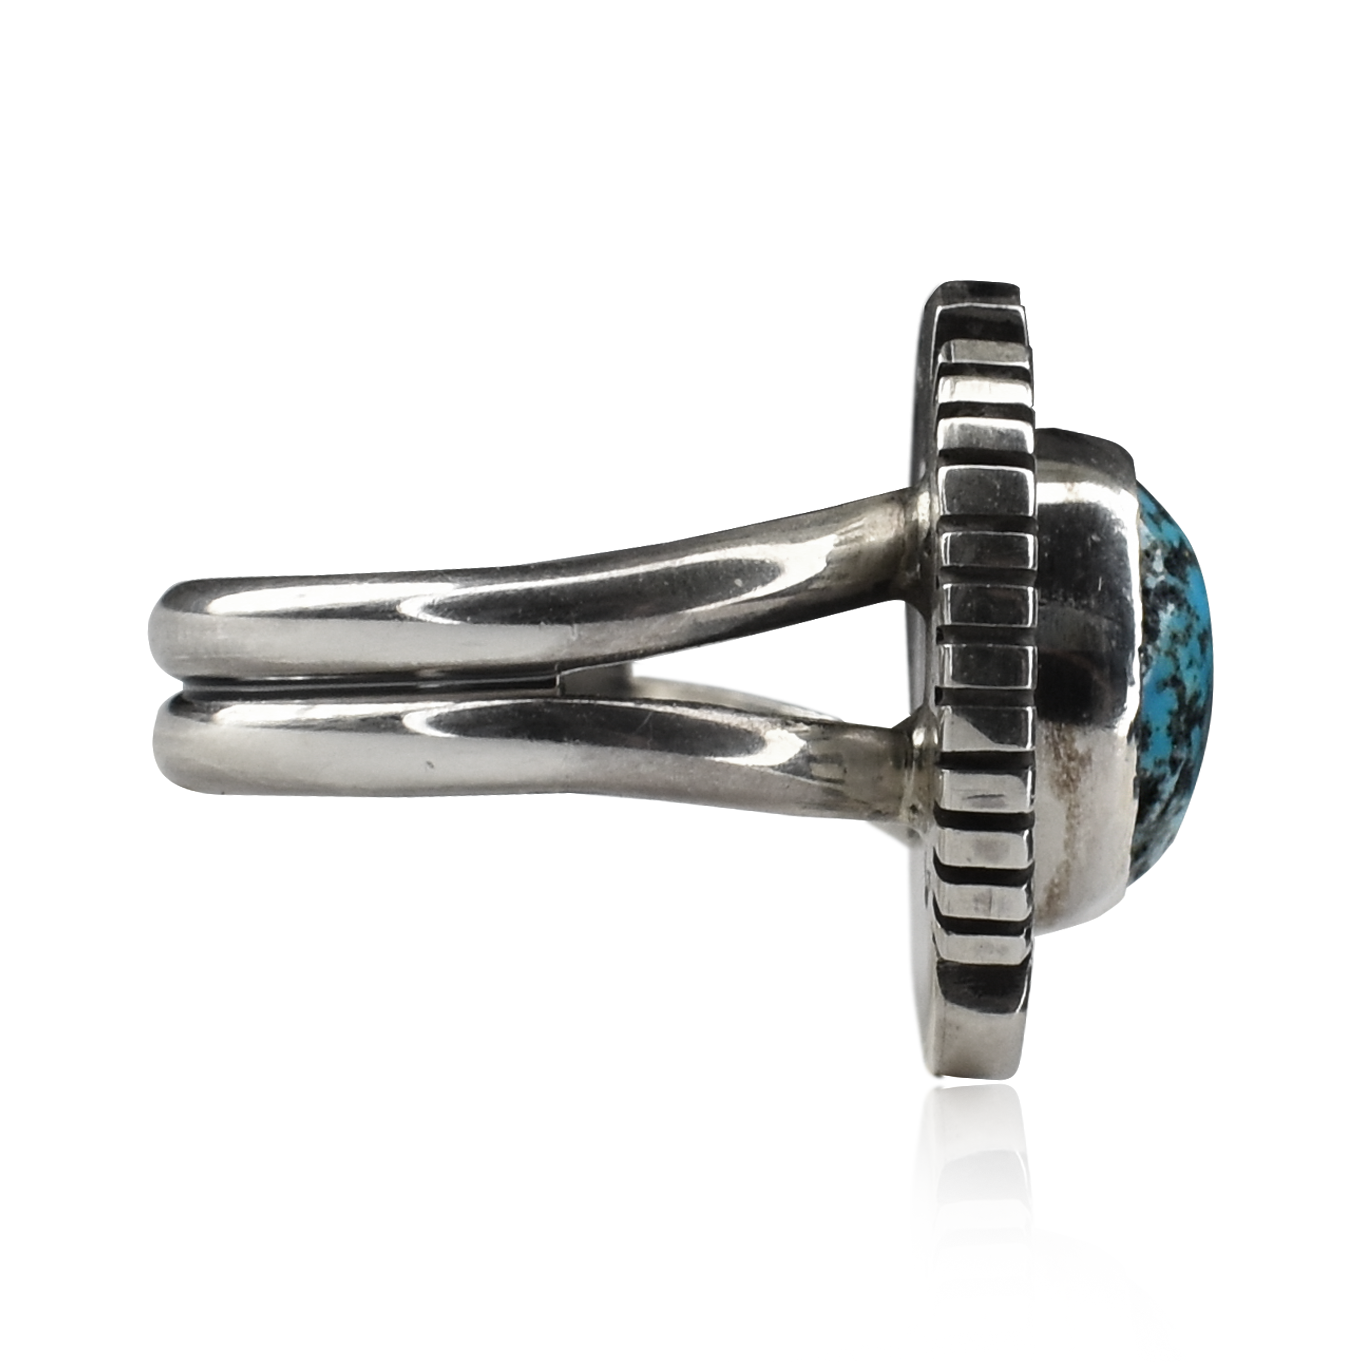 Kingston Turquoise Ring with Hand-Sawed Edges by Glenn & Irene Sandoval